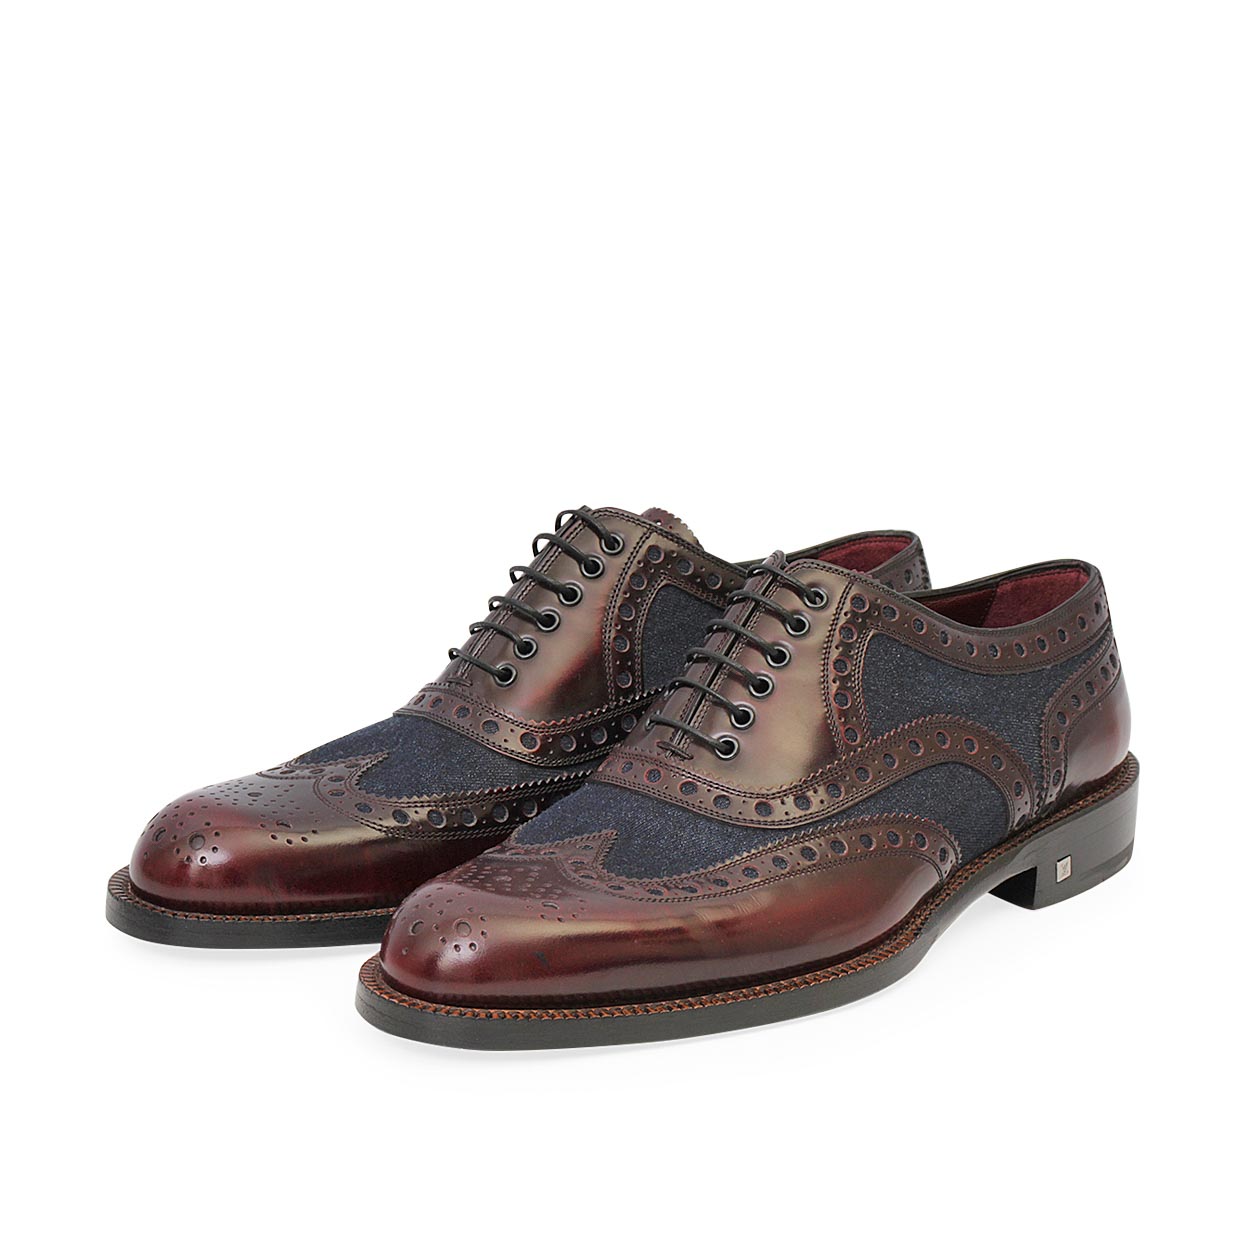 LOUIS VUITTON VOLTAIRE DERBY SHOES IN MOKA BROWN LEATHER 45 45.5